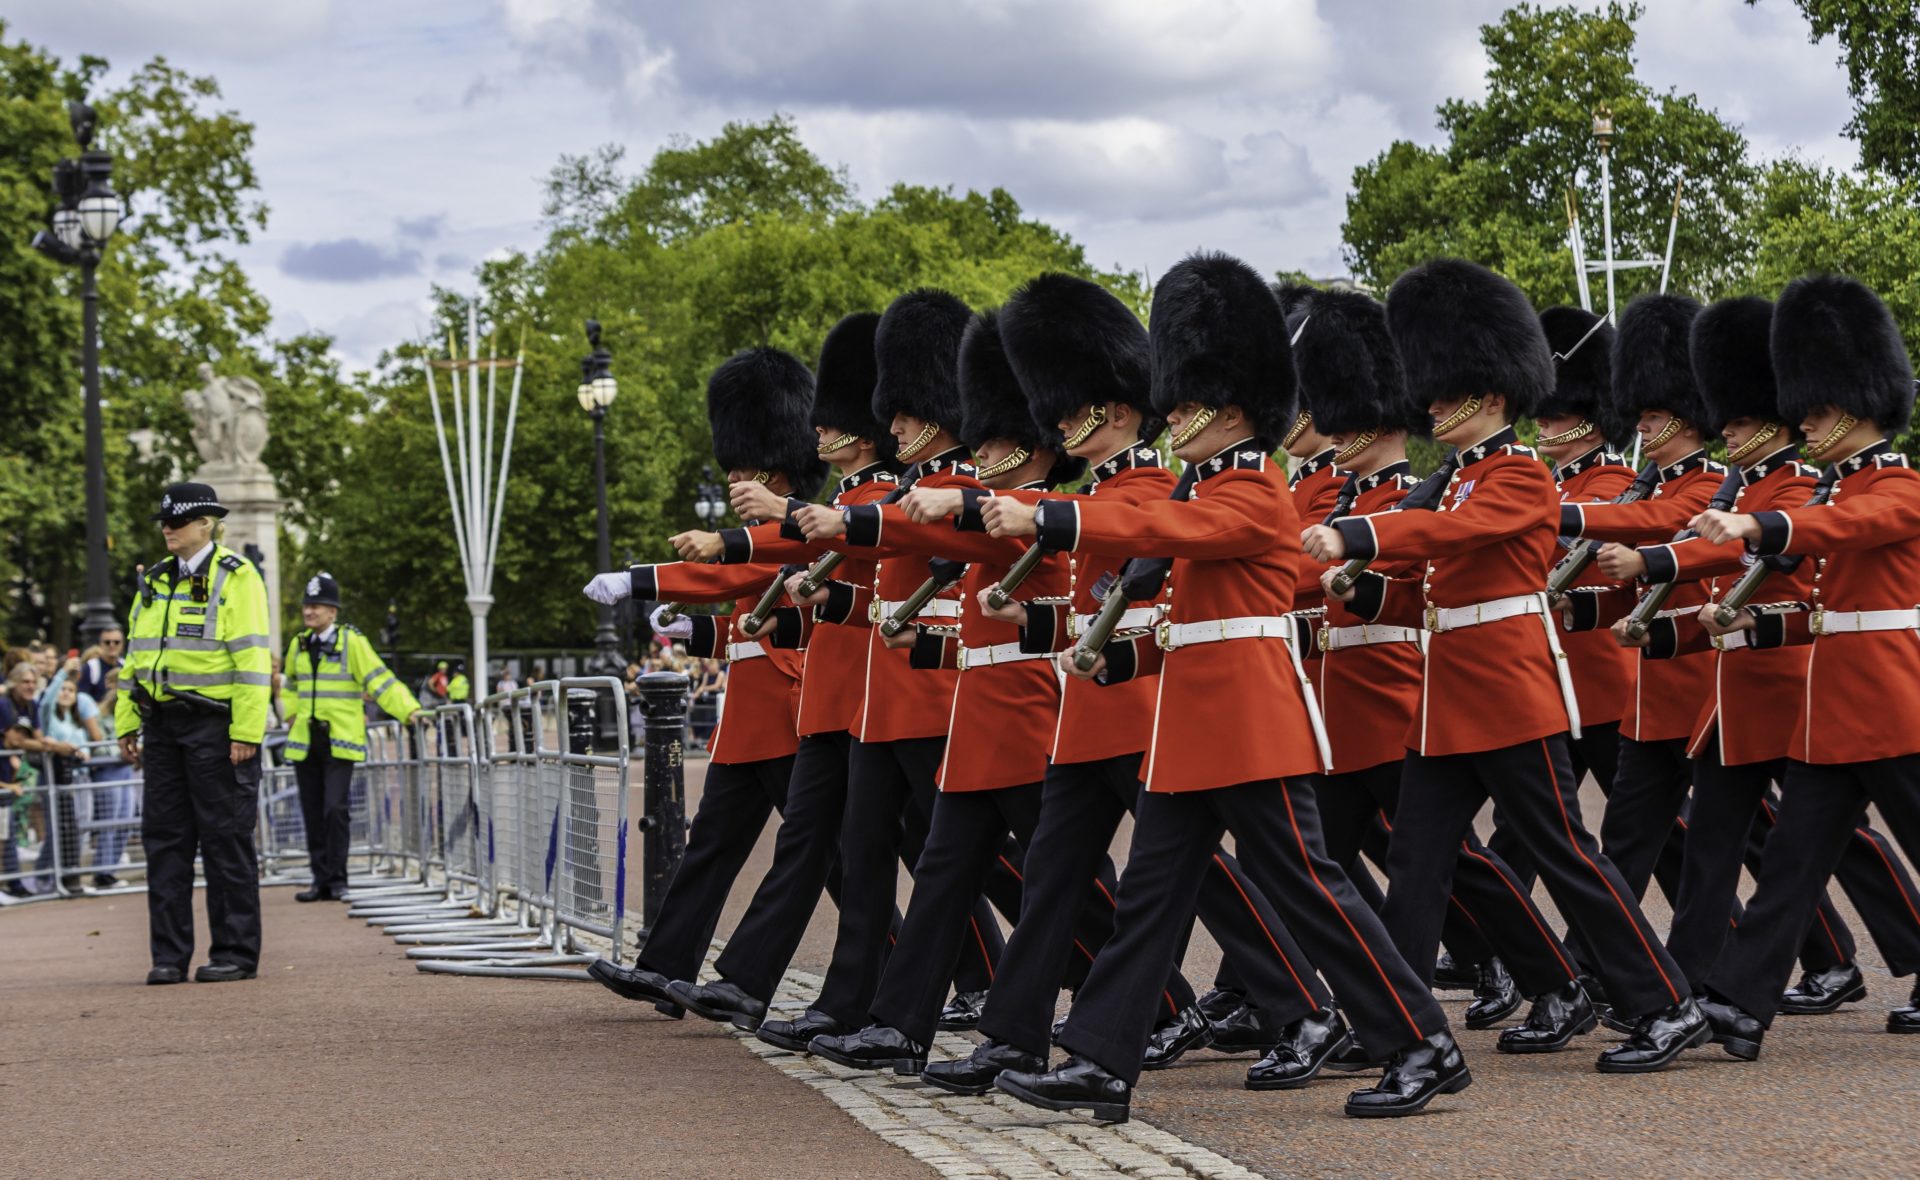 Members of the Irish Guards regiment of the British Army march in London, England.